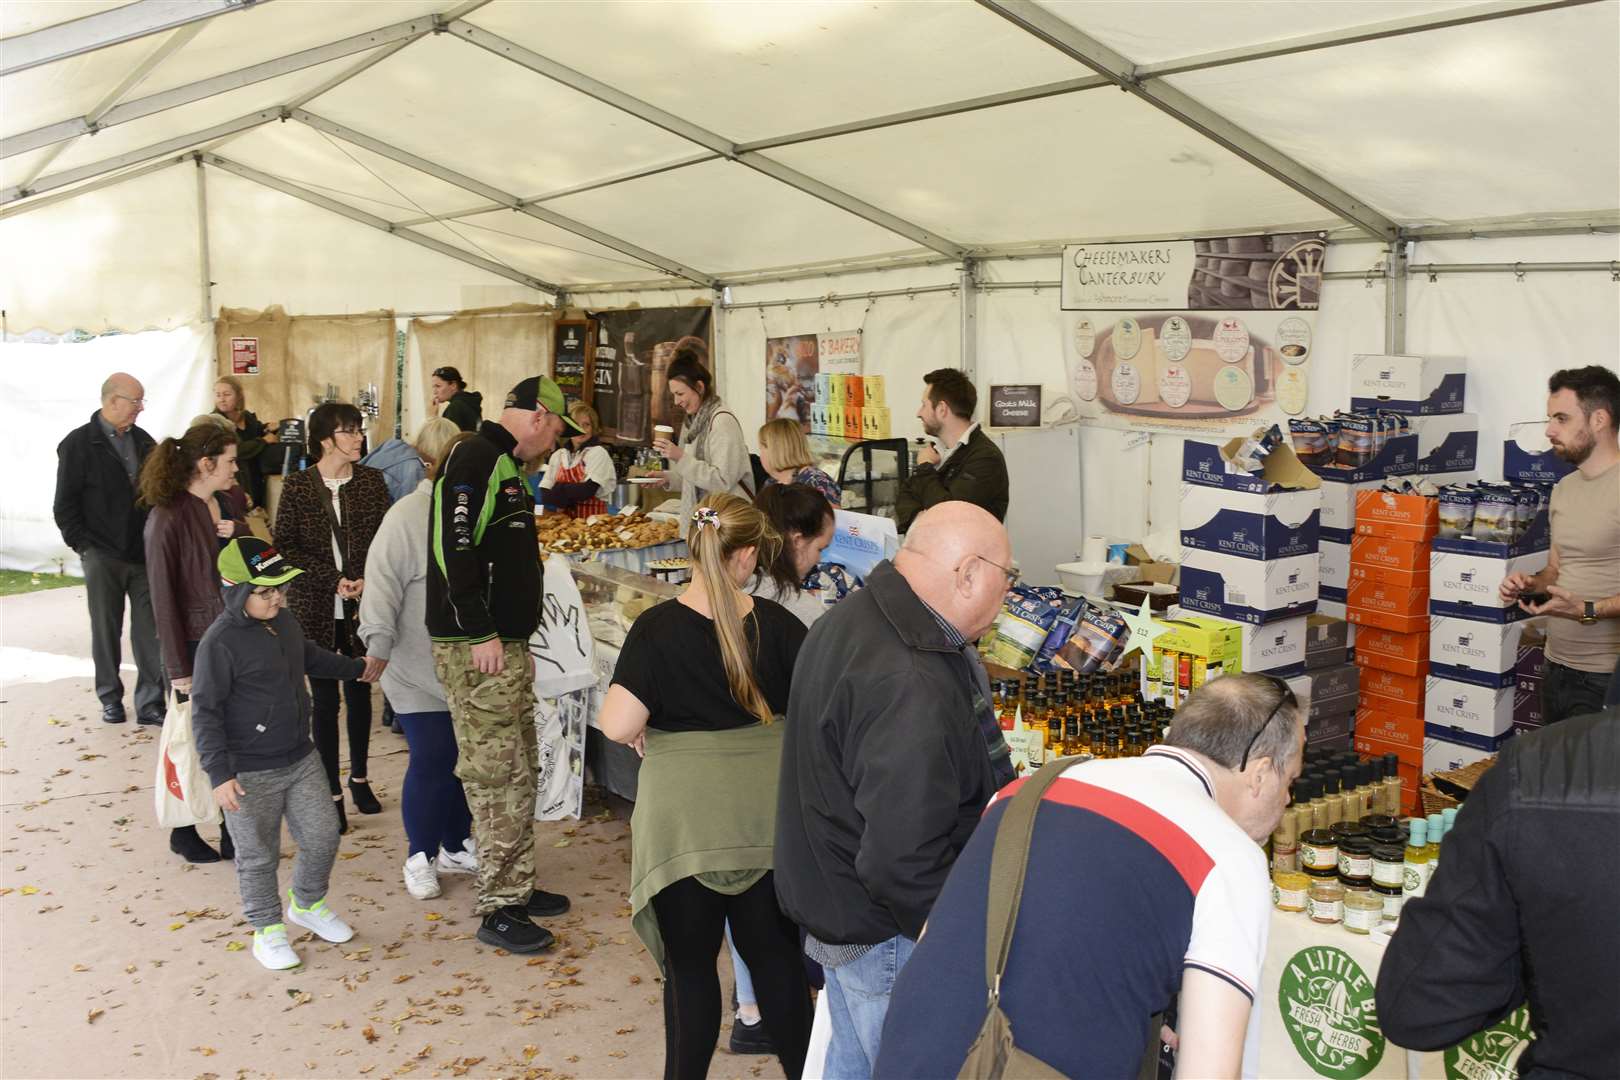 Canterbury Food and Drink Festival was last held in 2019